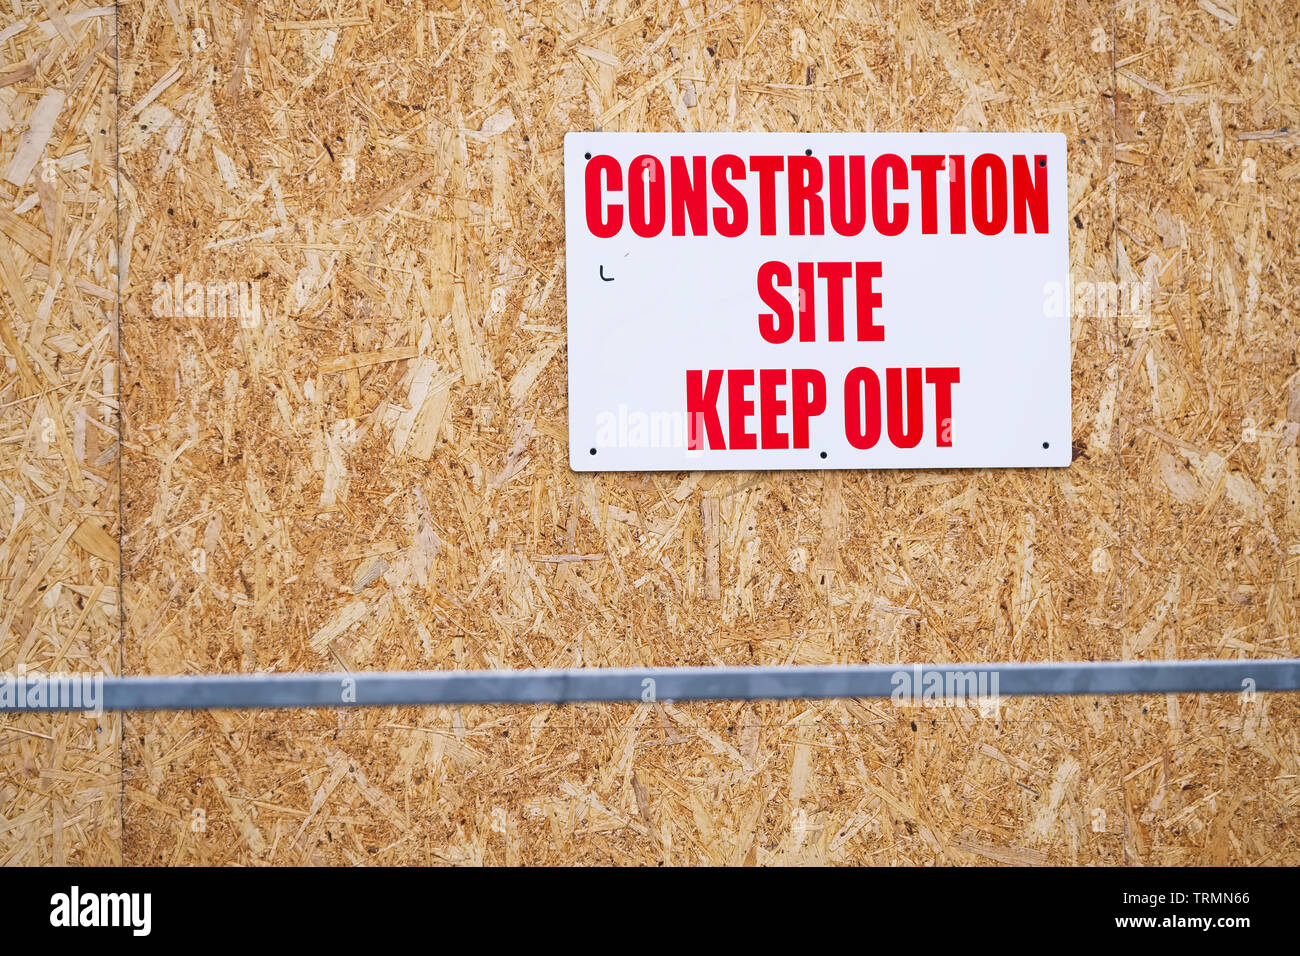 Keep out sign at construction building site Stock Photo